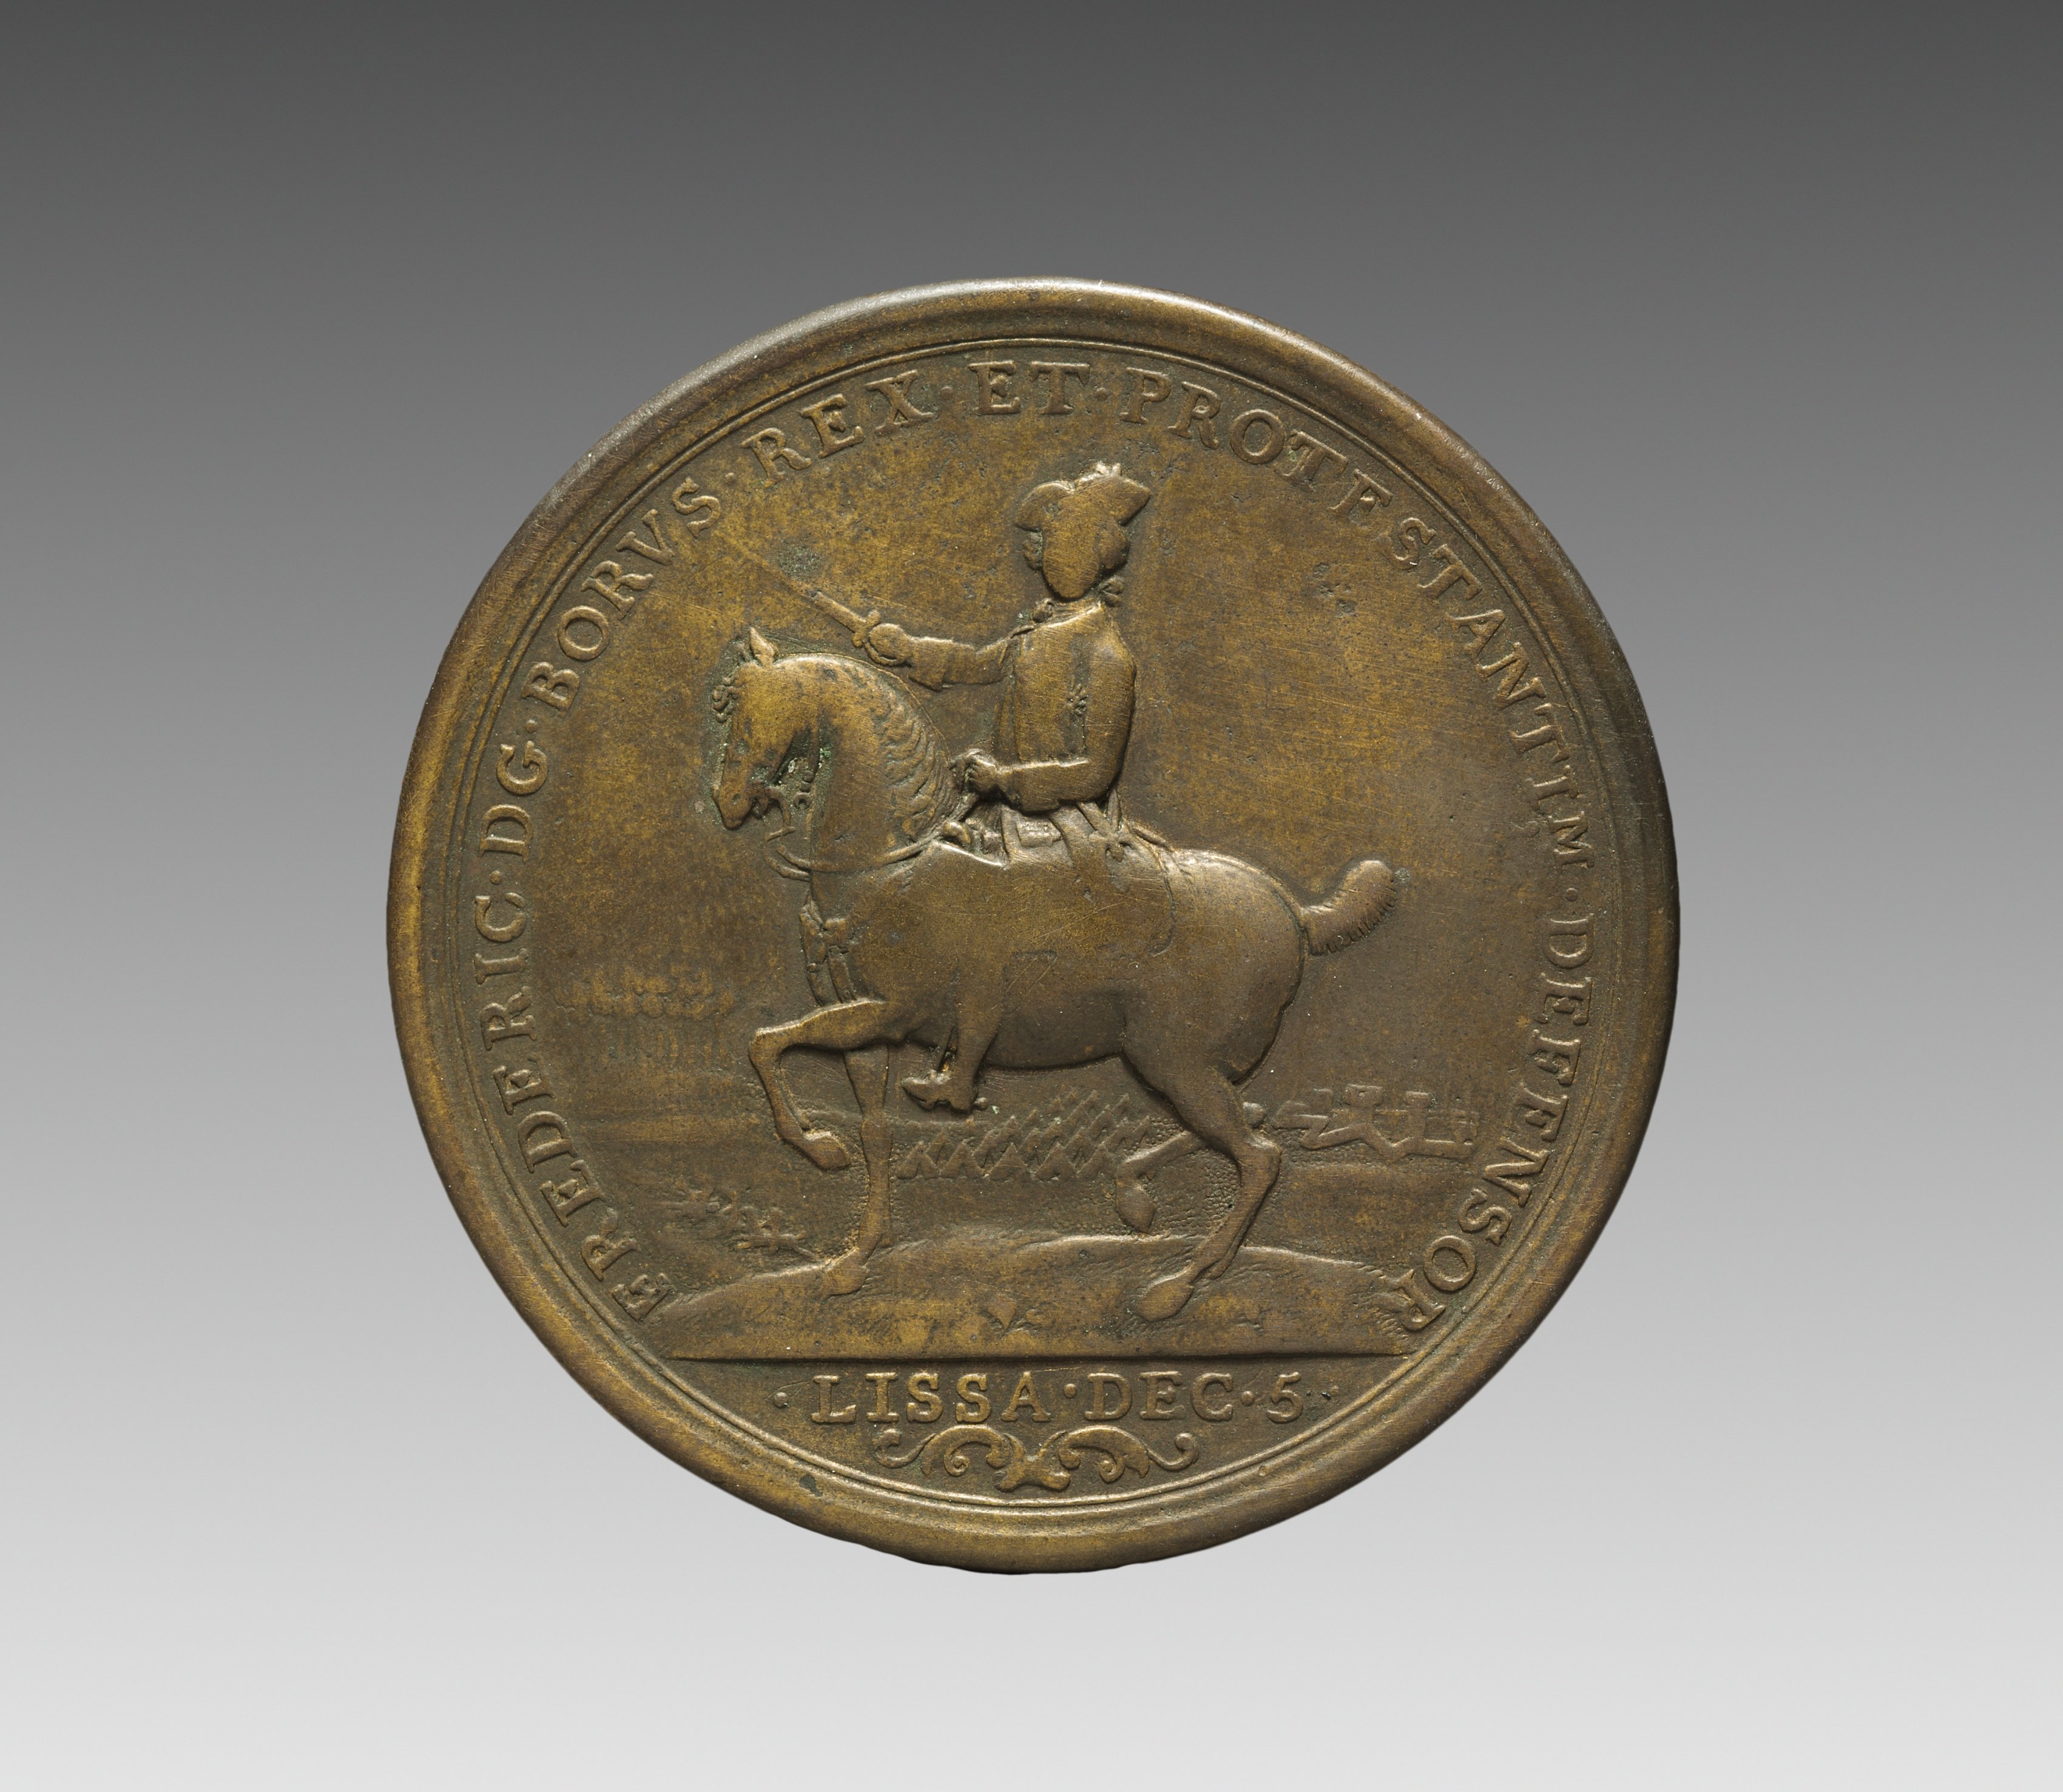 Portrait of Frederick the Great, King of Prussia (obverse)